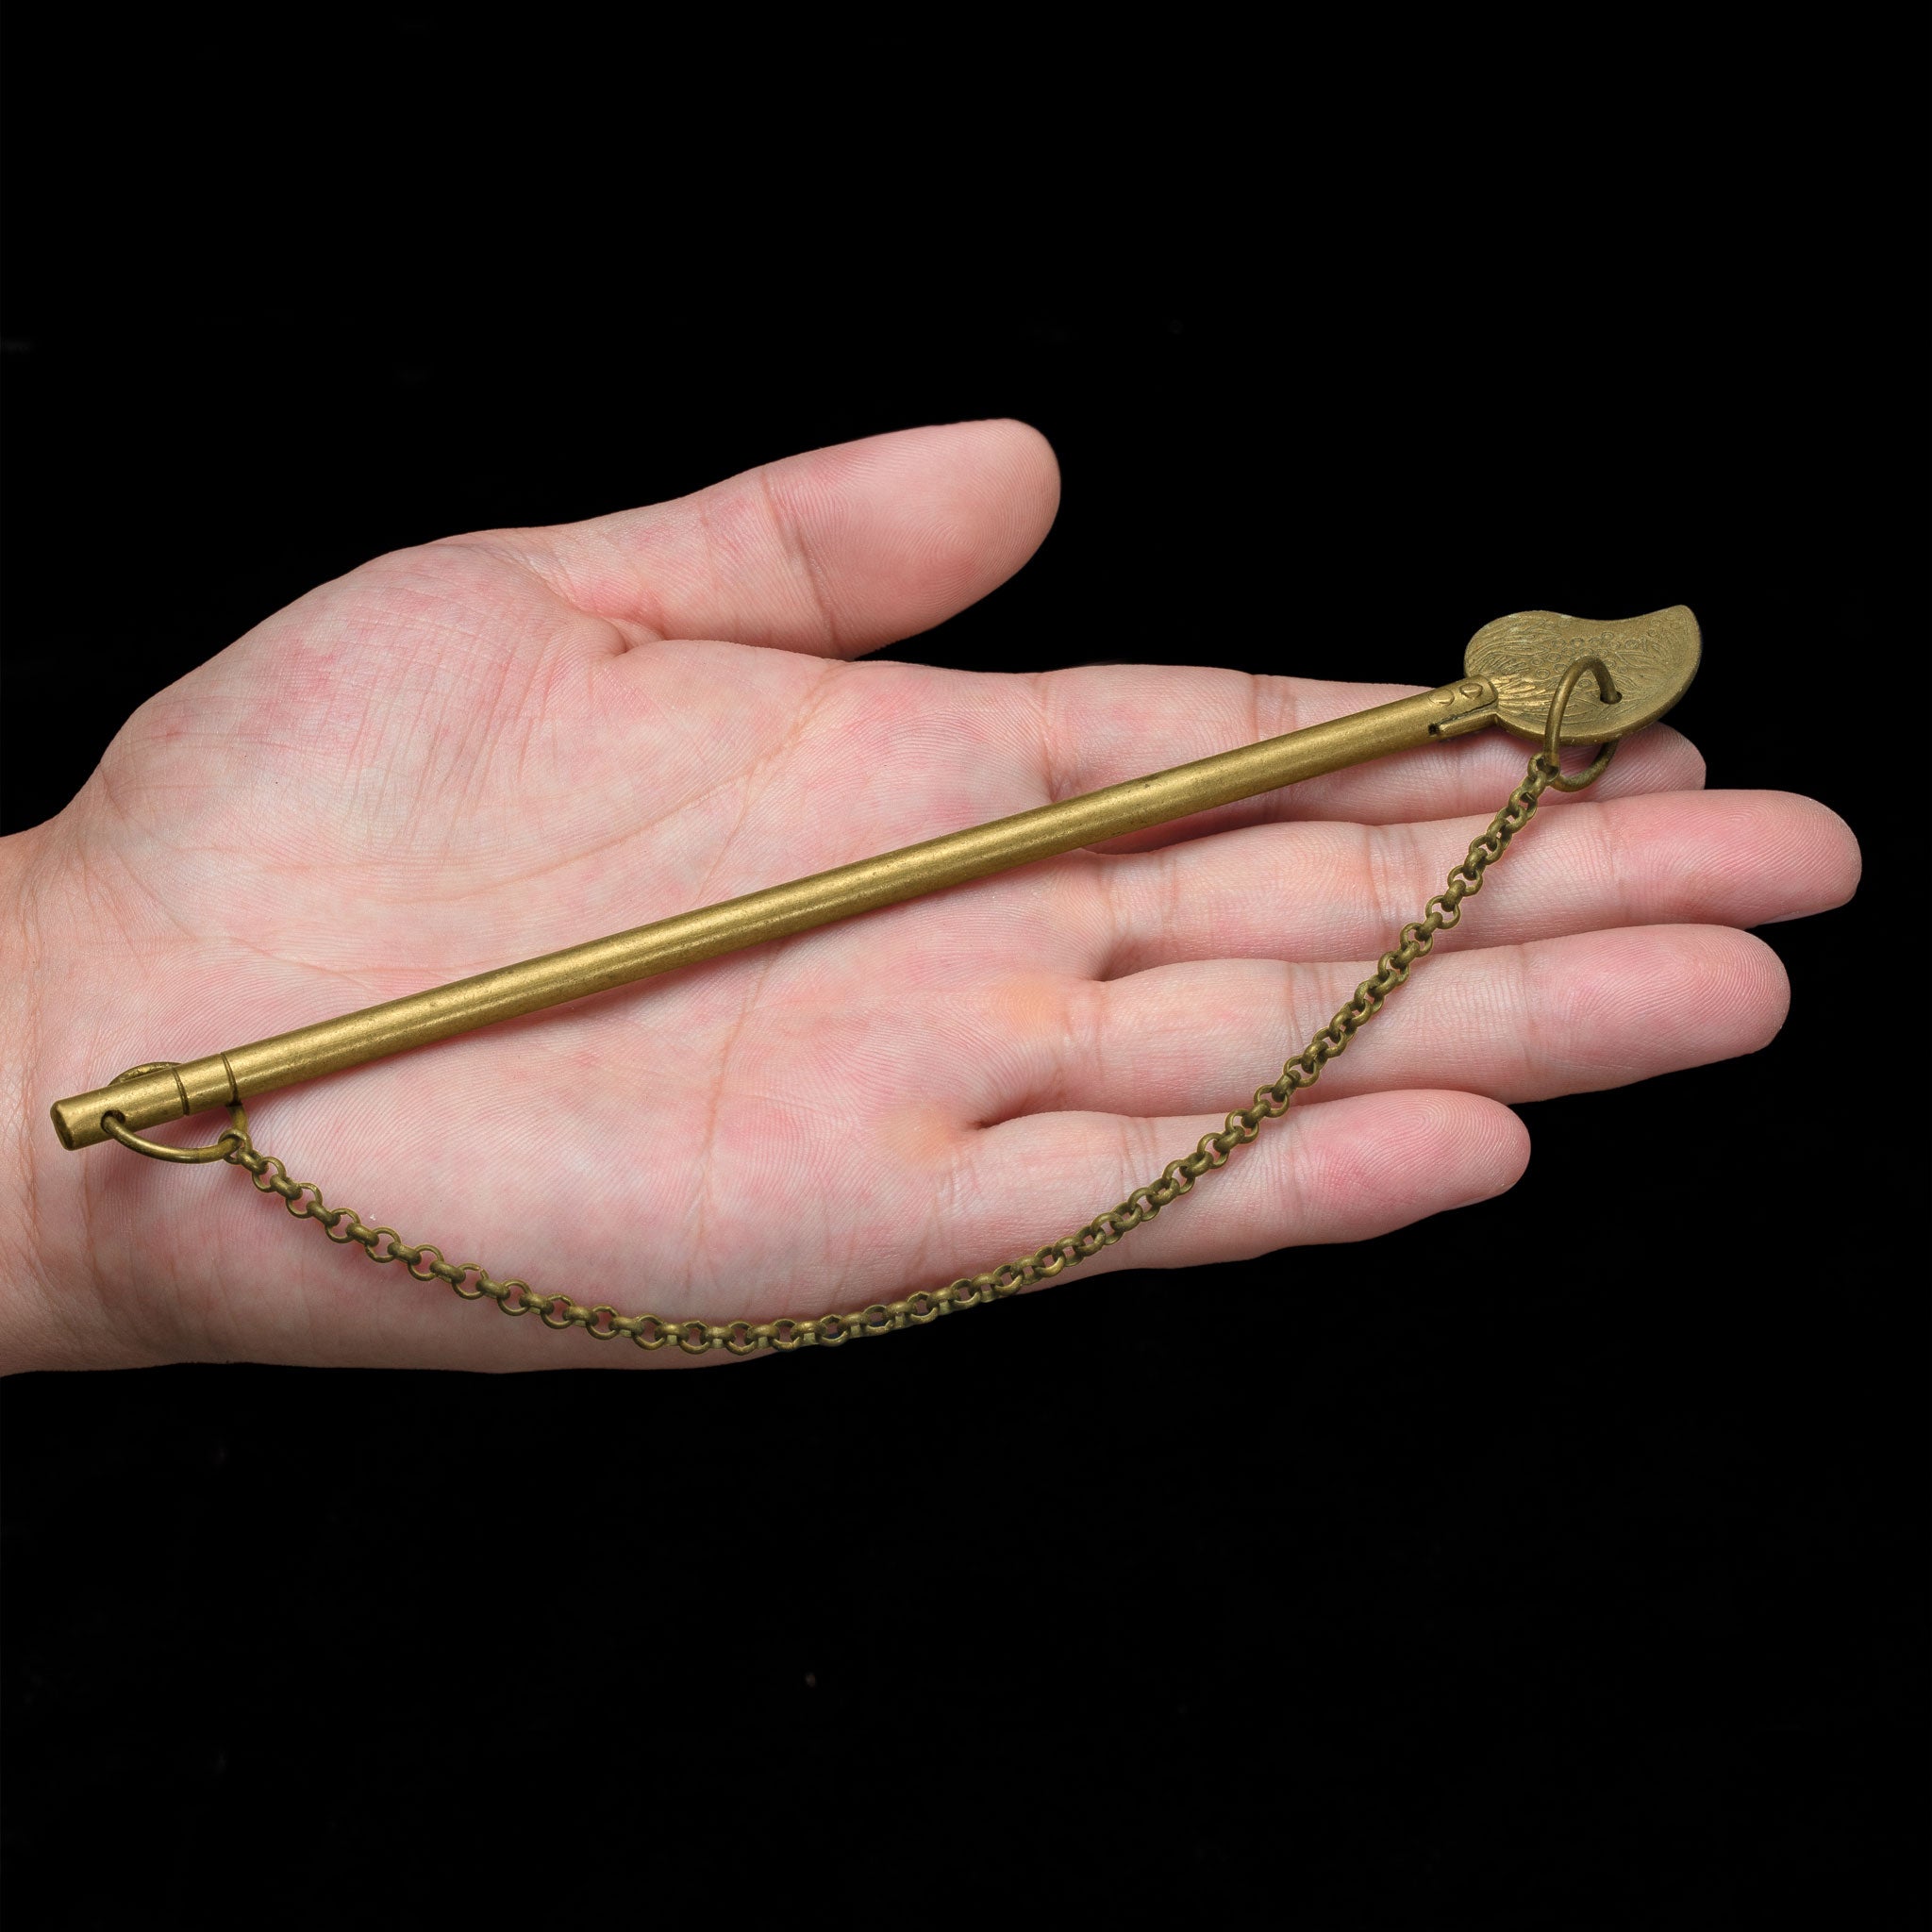 Bird Tail Brass Key with Chain 5.8" - Set of 2-Chinese Brass Hardware